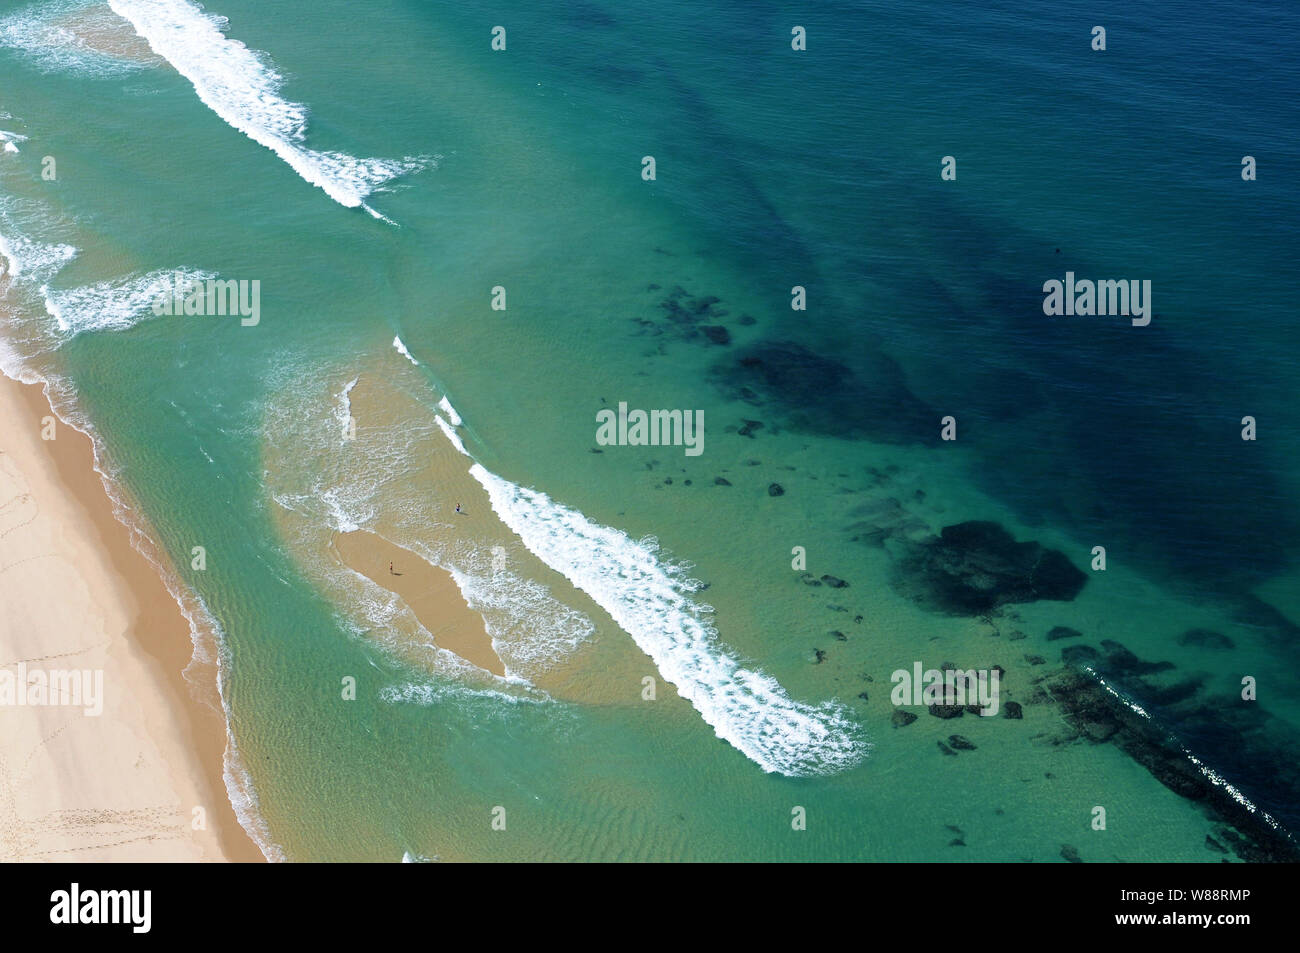 Aerial photo of the reserva beach with aguá of the Caribbean beach, located in the west zone of the city of Rio de Janeiro, Brazil. Stock Photo